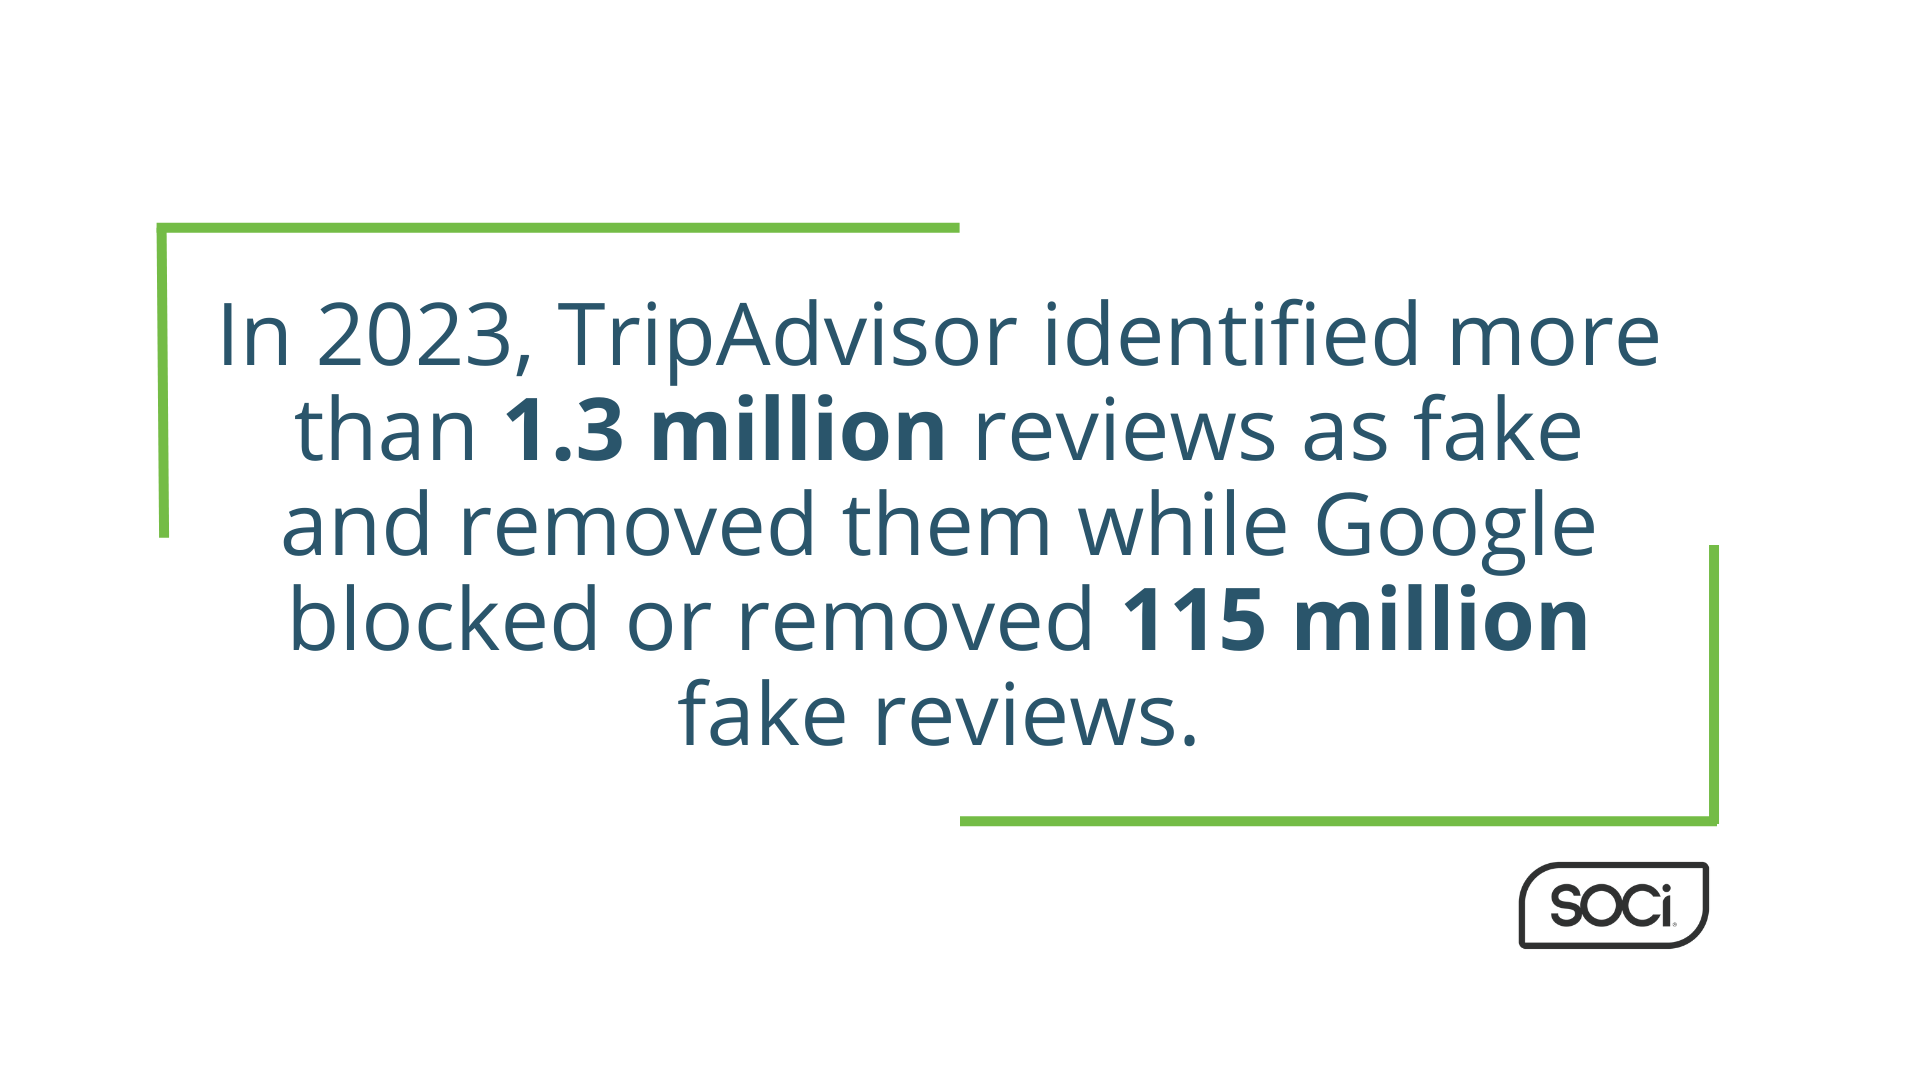 To stats highlighting how a large number of fake reviews are being removed from search sites